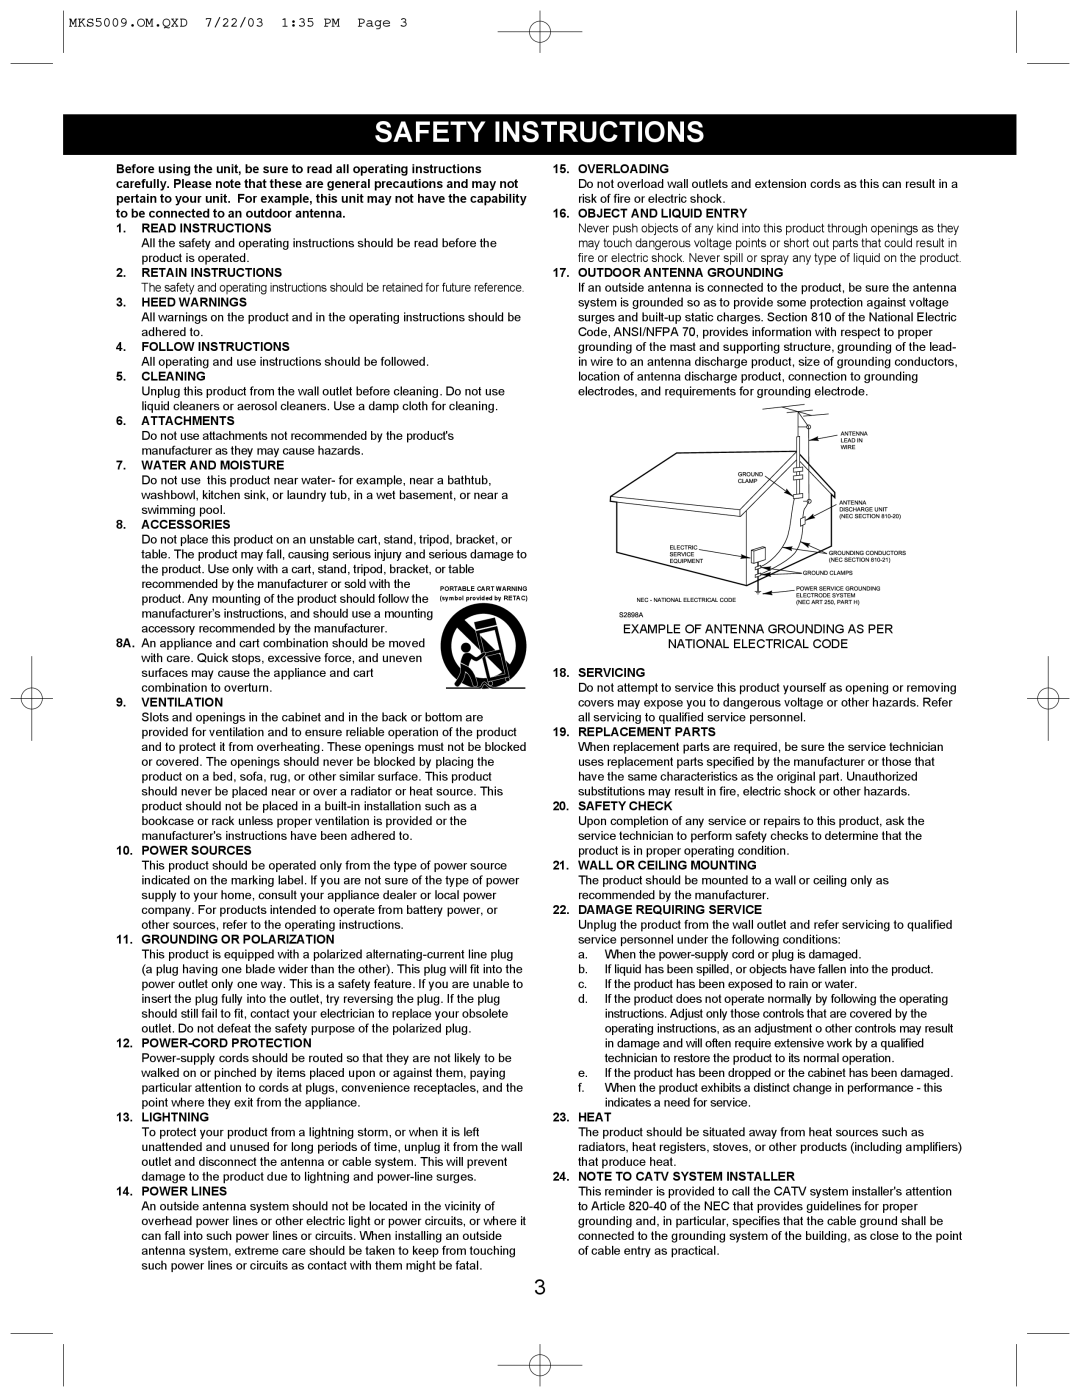 Memorex MB2186A manual Safety Instructions, MKS5009.OM.QXD 7/22/03 1:35 PM Page 